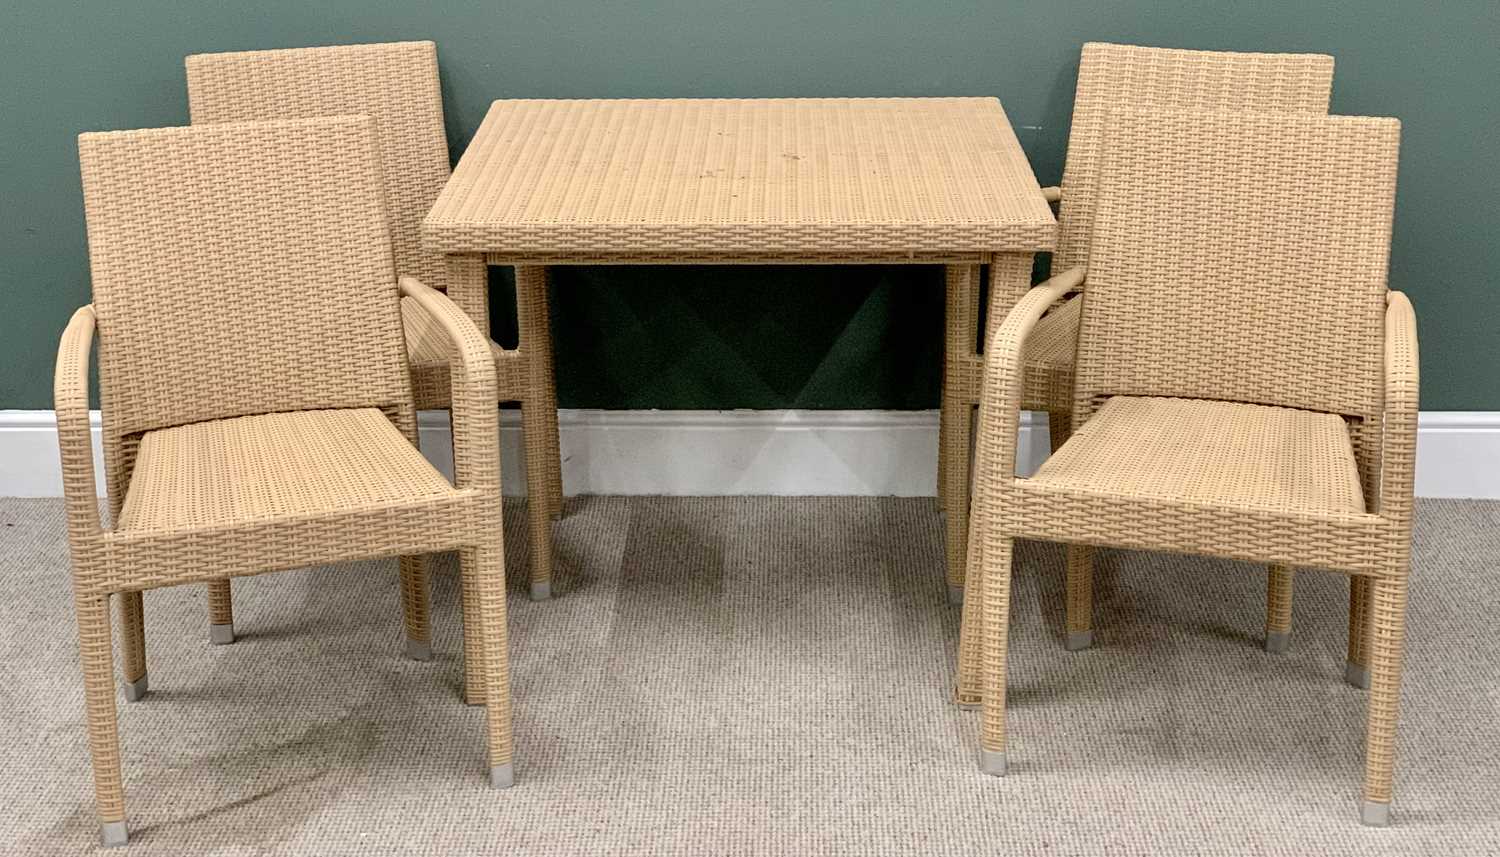 GARDEN FURNITURE - modern rattan type dining set comprising square top table, 76cms H, 90cms W,